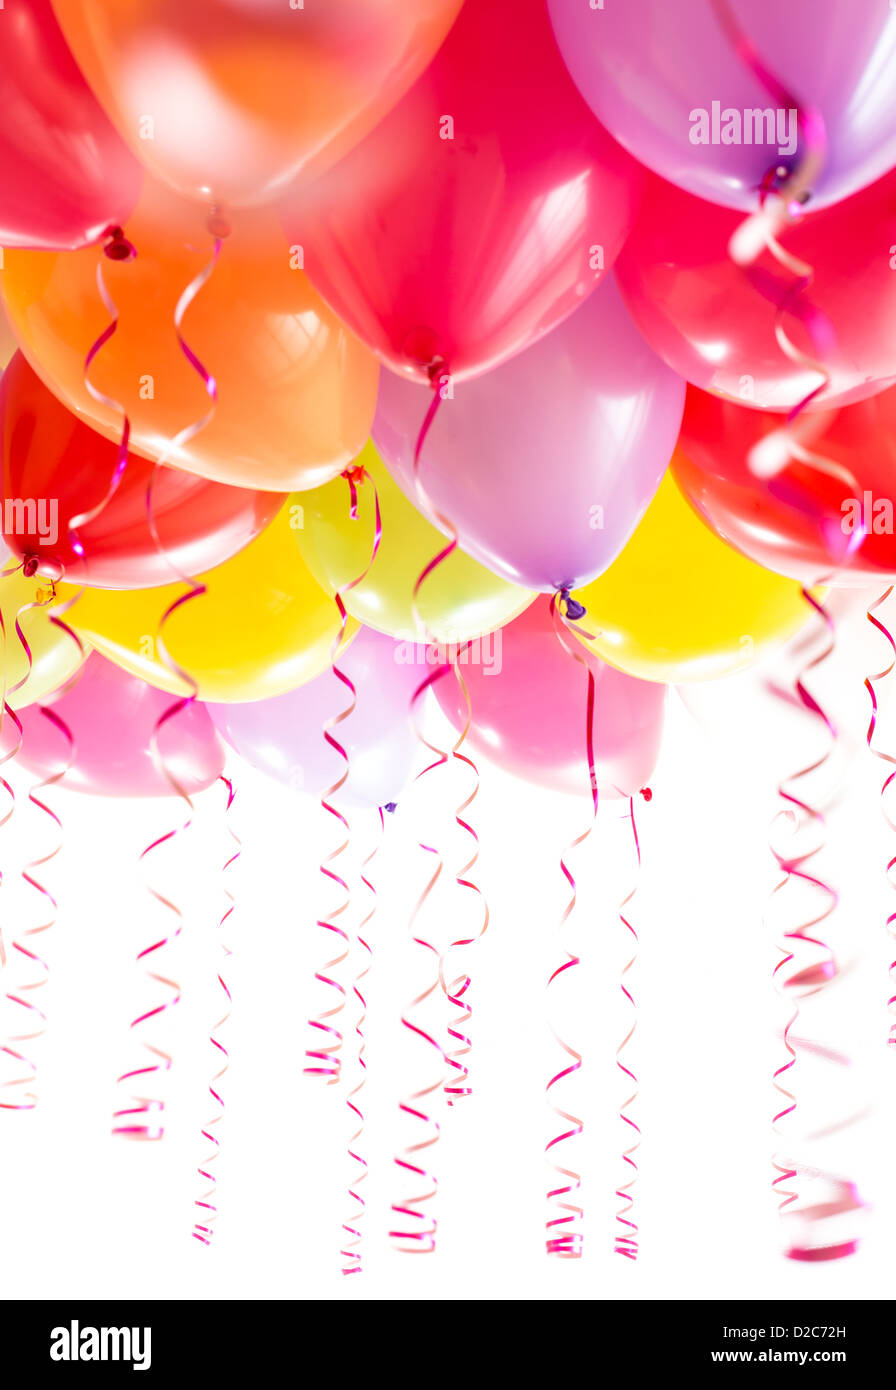 balloons with streamers for birthday party celebration isolated on white background Stock Photo